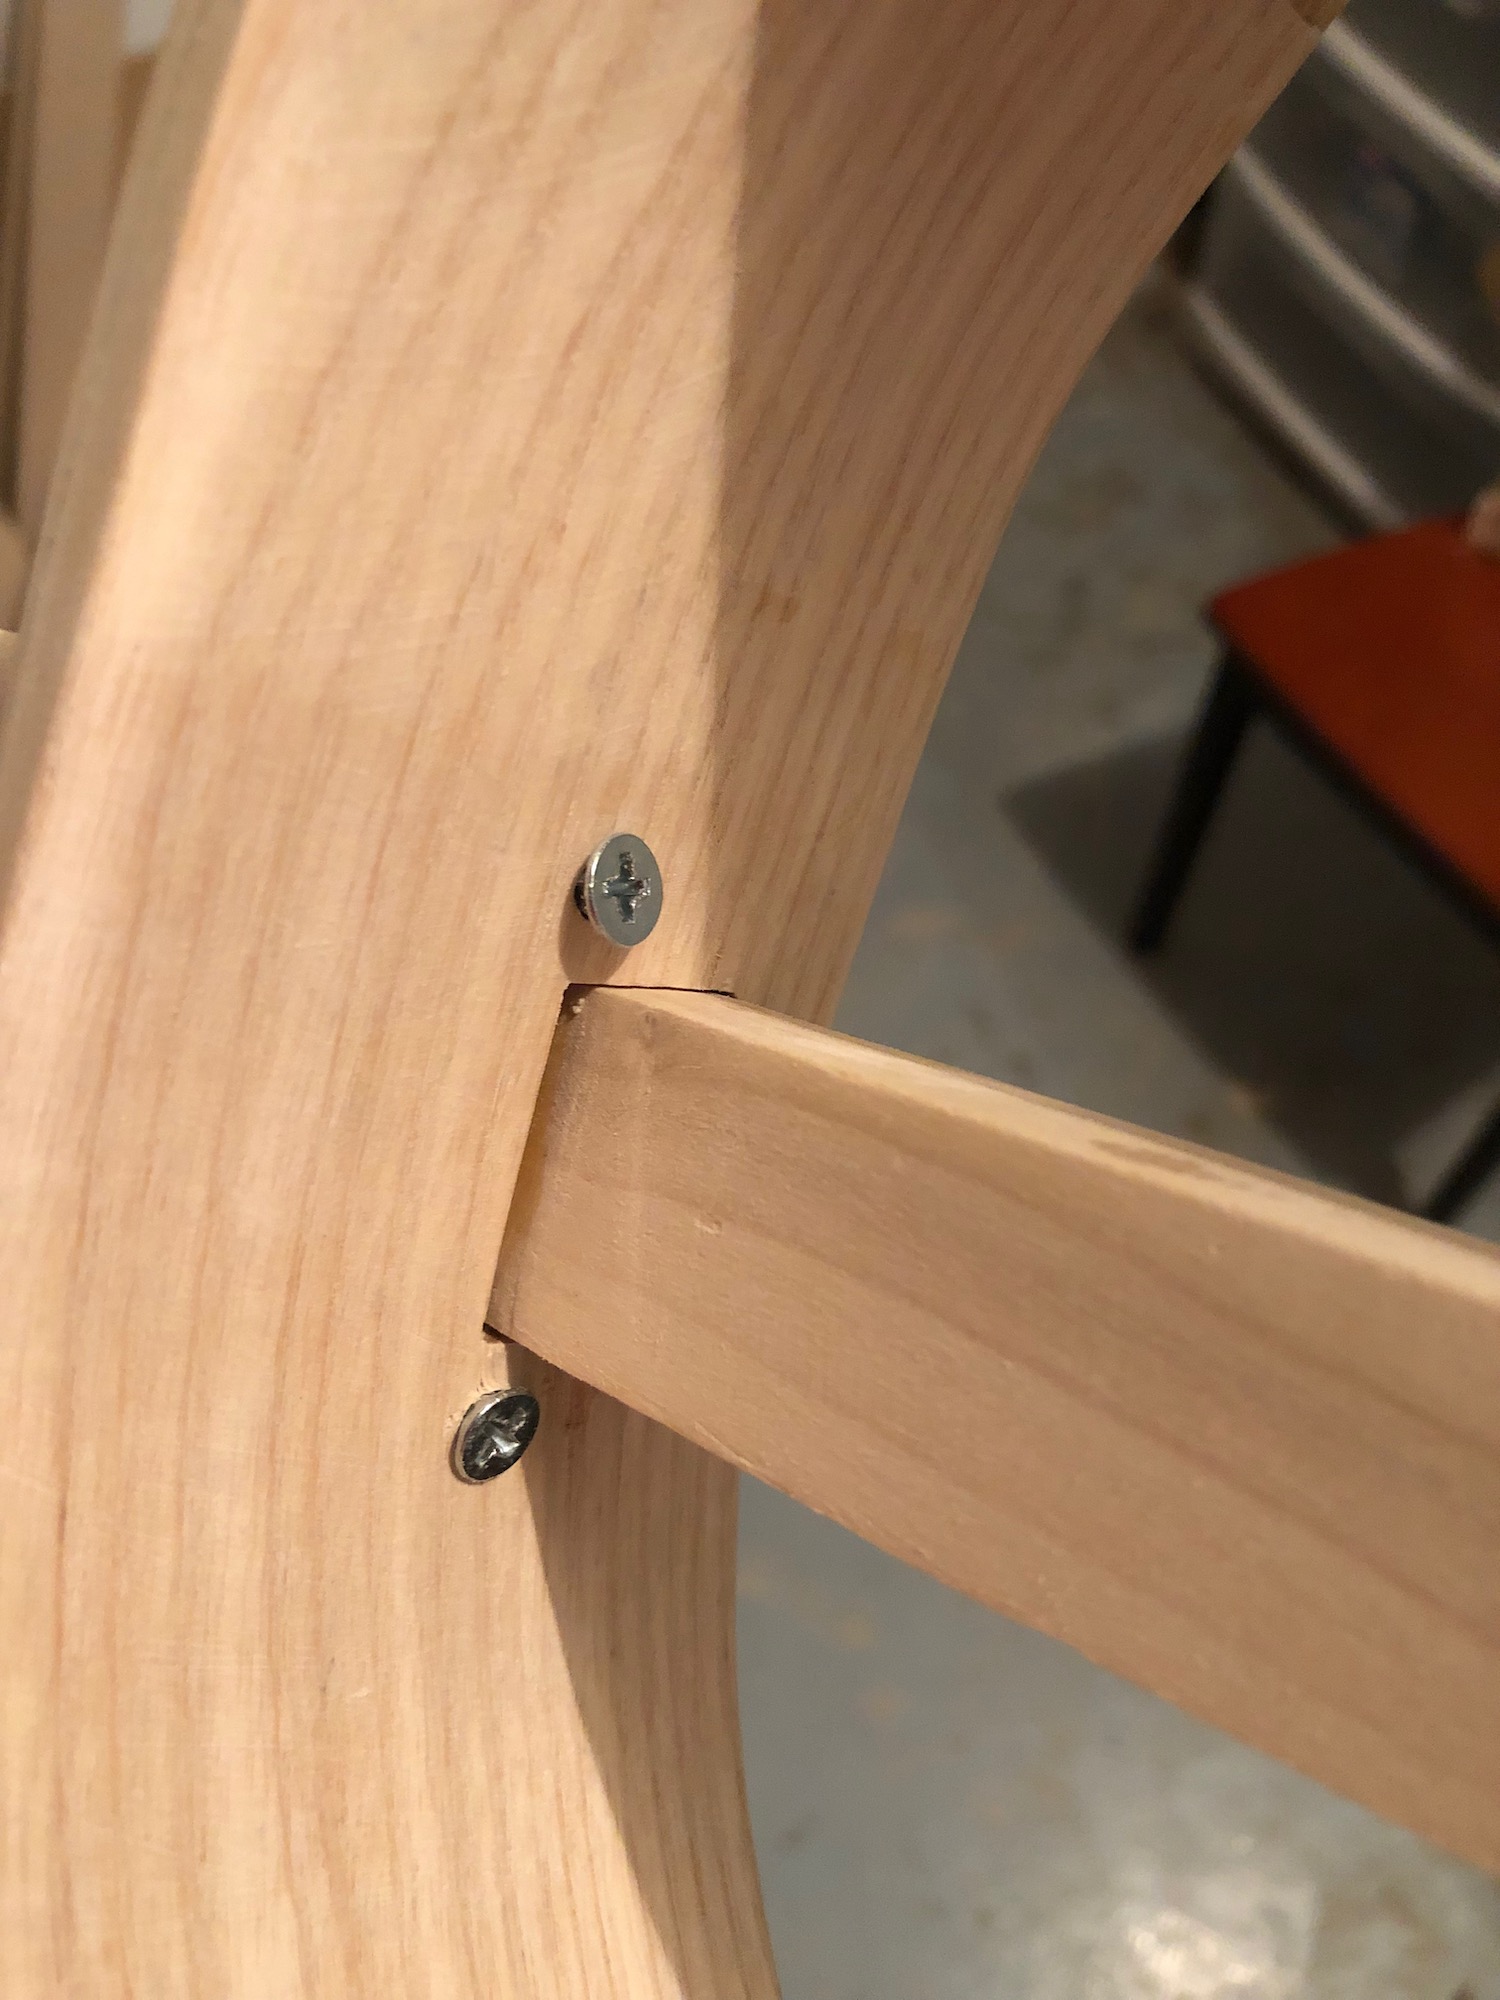 Using screws to attach the neck to the rim